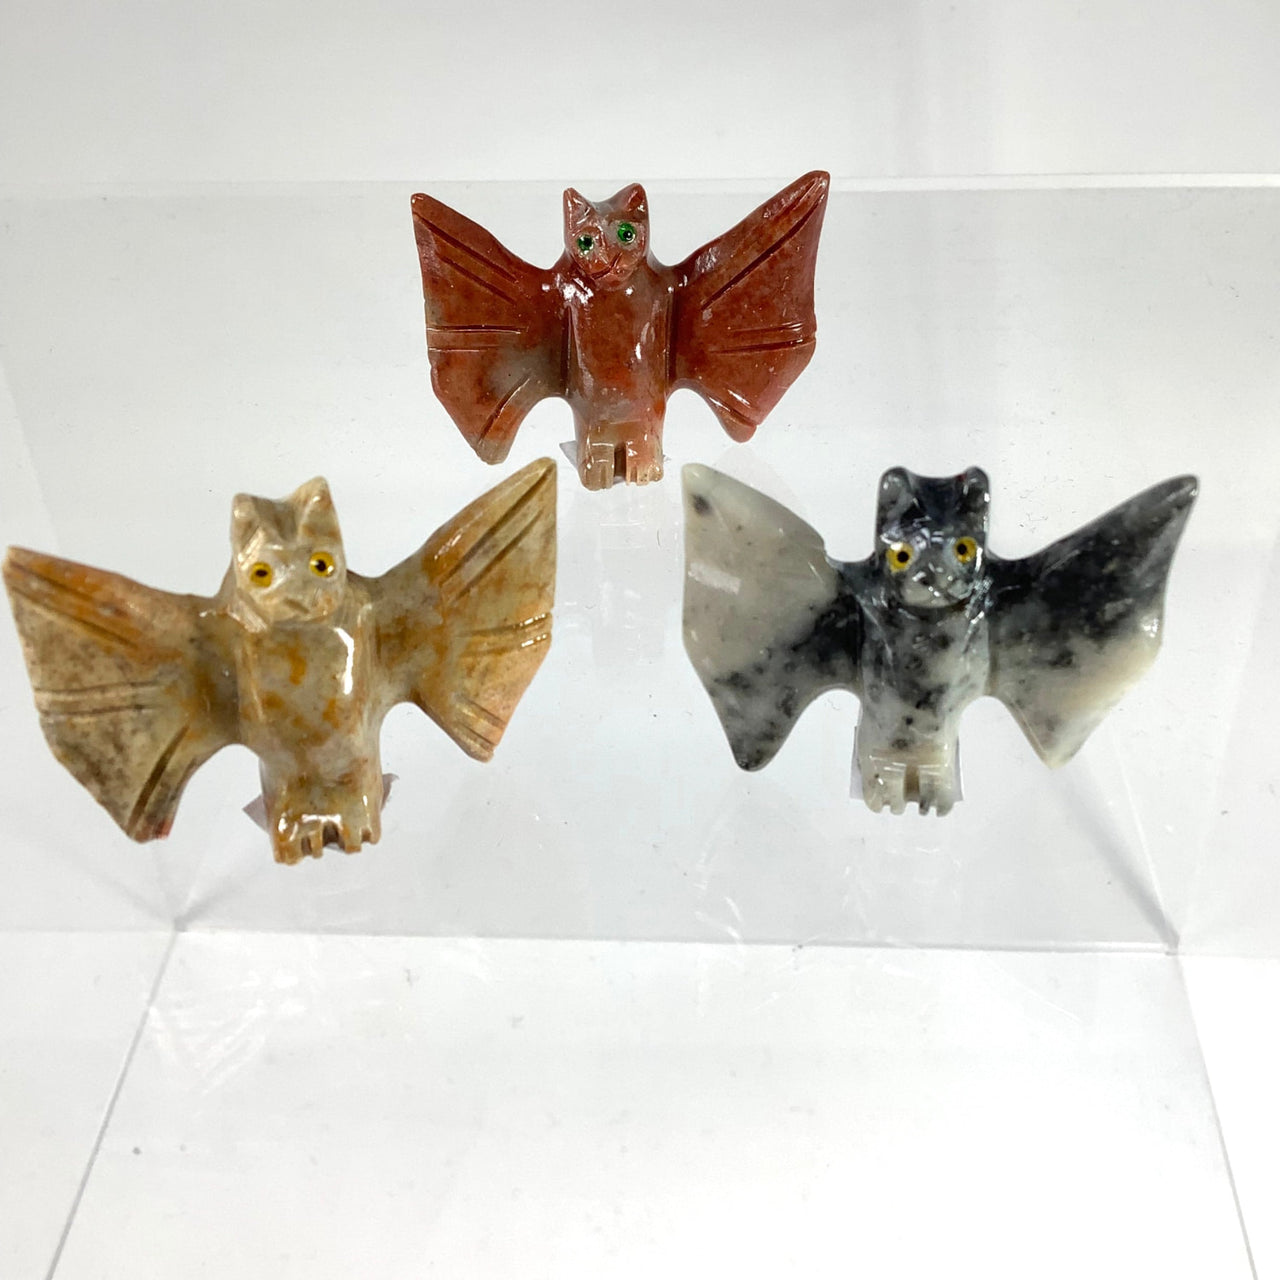 Soapstone Baby Animal Carving from Peru: Three Small Birds in Glass Cases